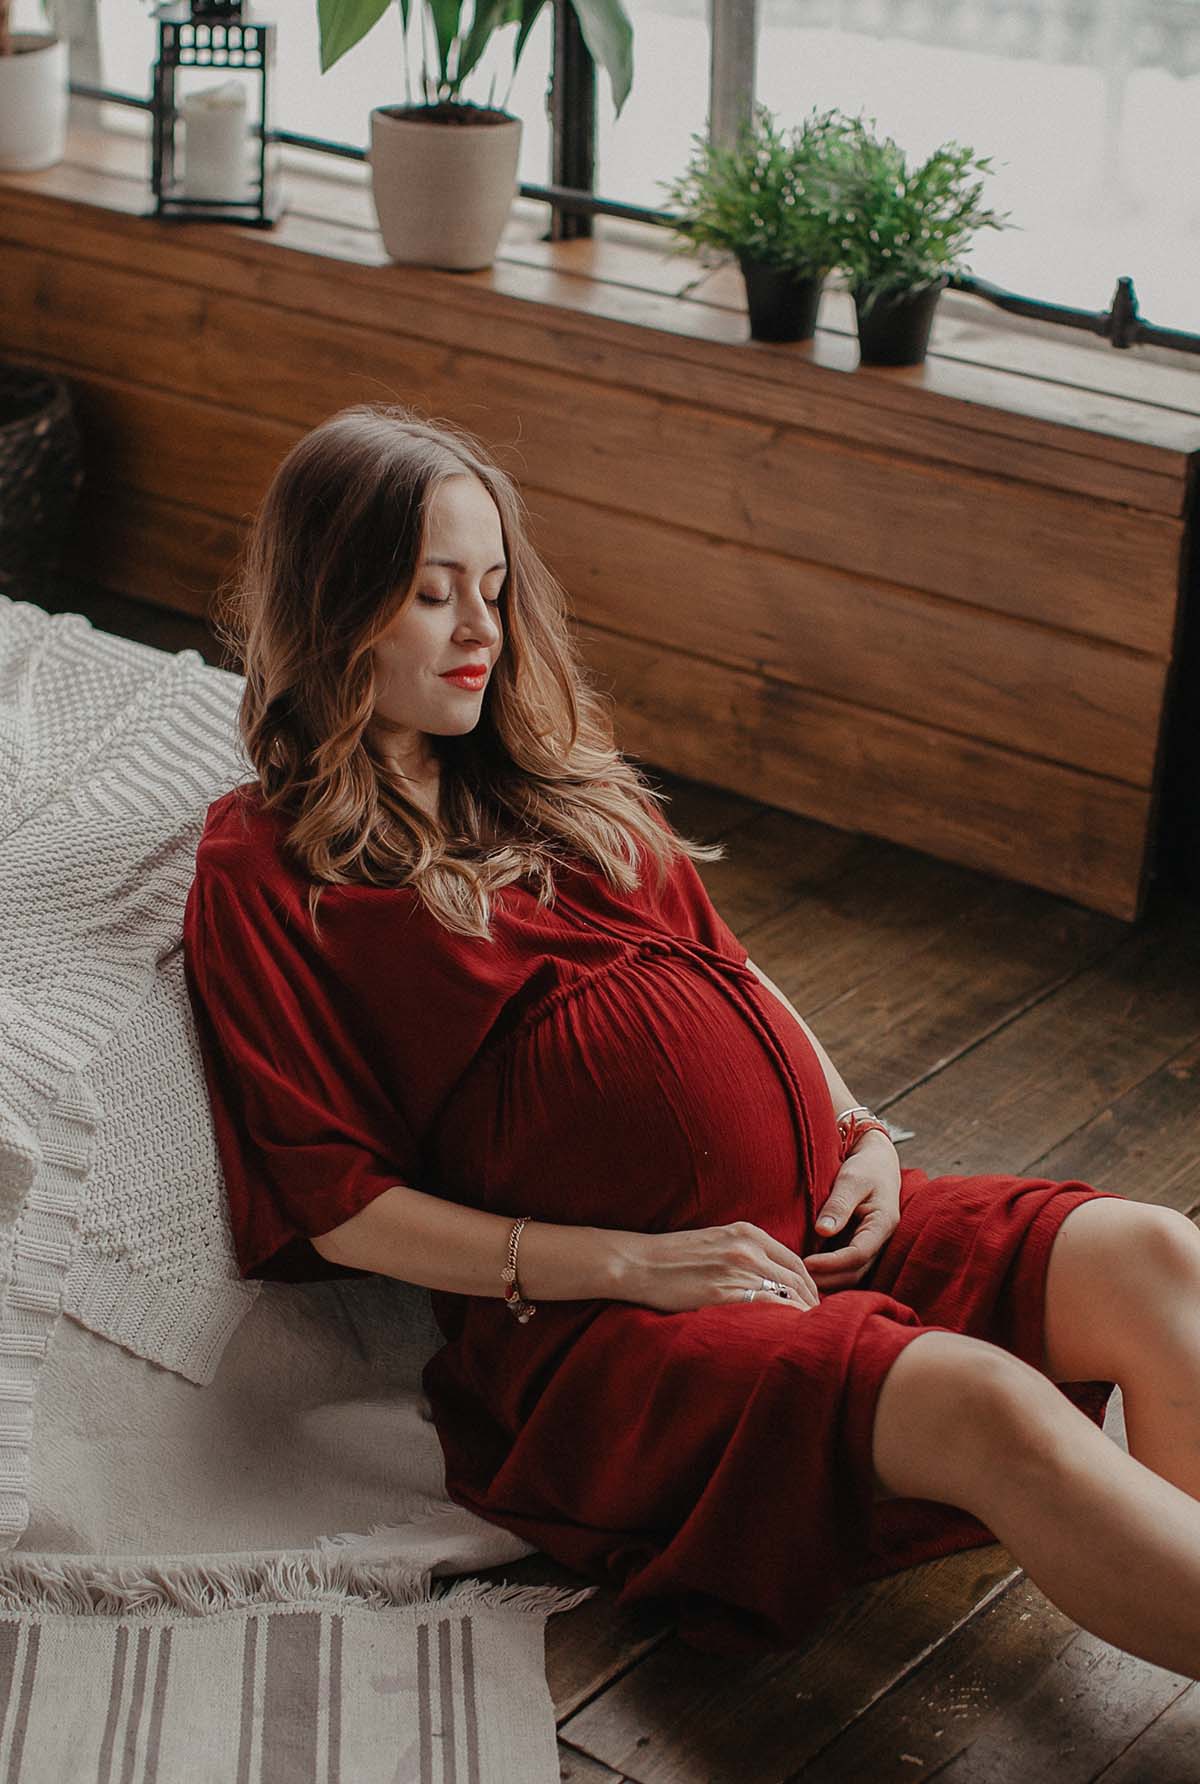 Hyperemesis Gravidarum is not just morning sickness. It is a severe, life threatening condition and awareness needs to be spread. This is just one woman's story.